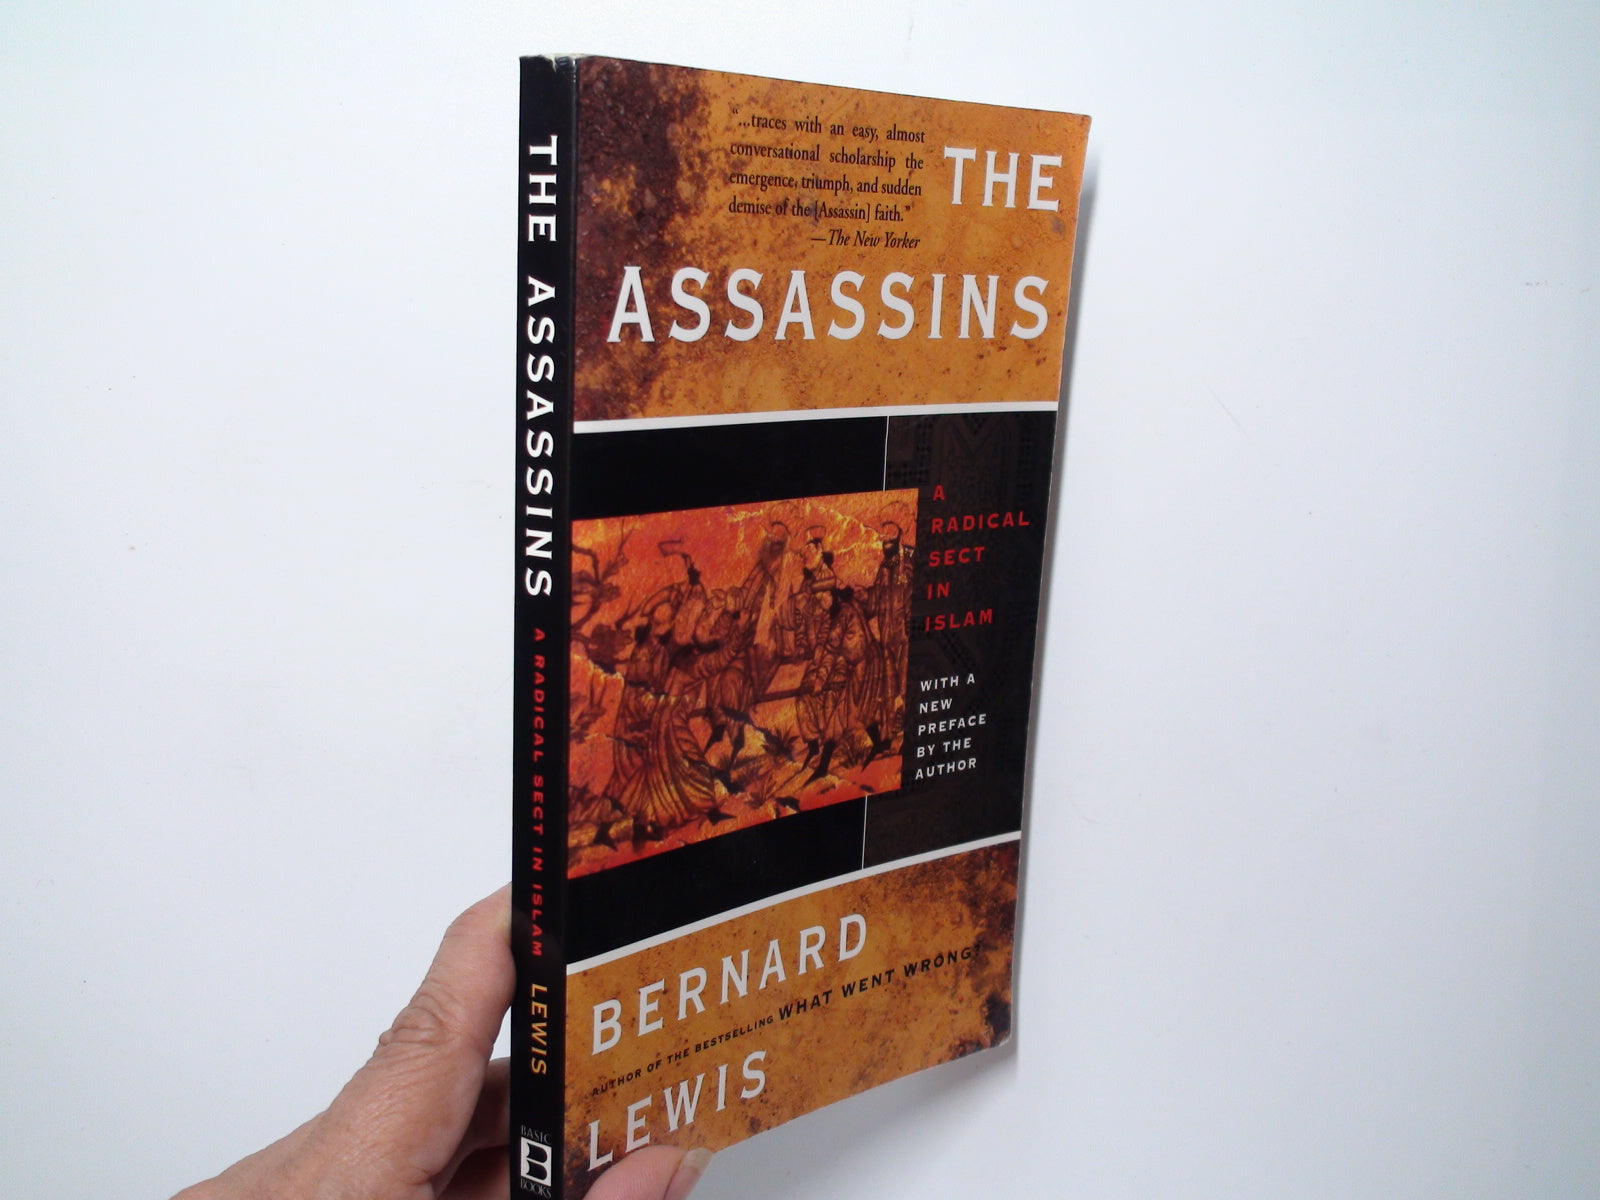 The Assassins, A Radical Sect in Islam by Bernard Lewis, Paperback, 2003